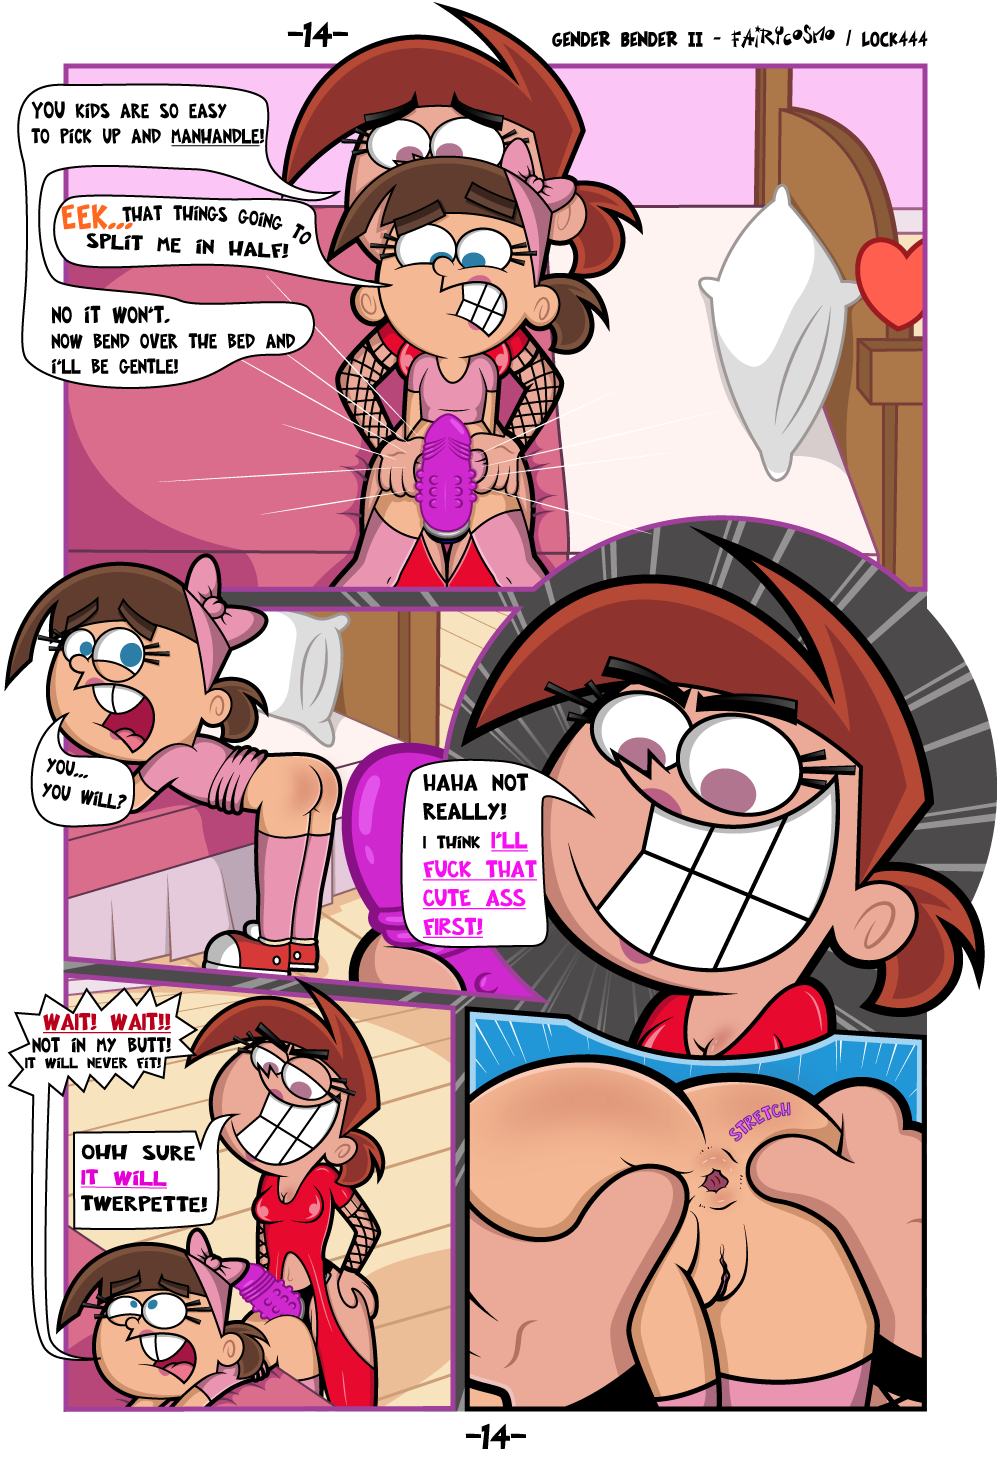 Fairly Oddparents Trixie Tentacle Porn - Gender Bender 2 - Fairly Odd Parents [FairyCosmo ...